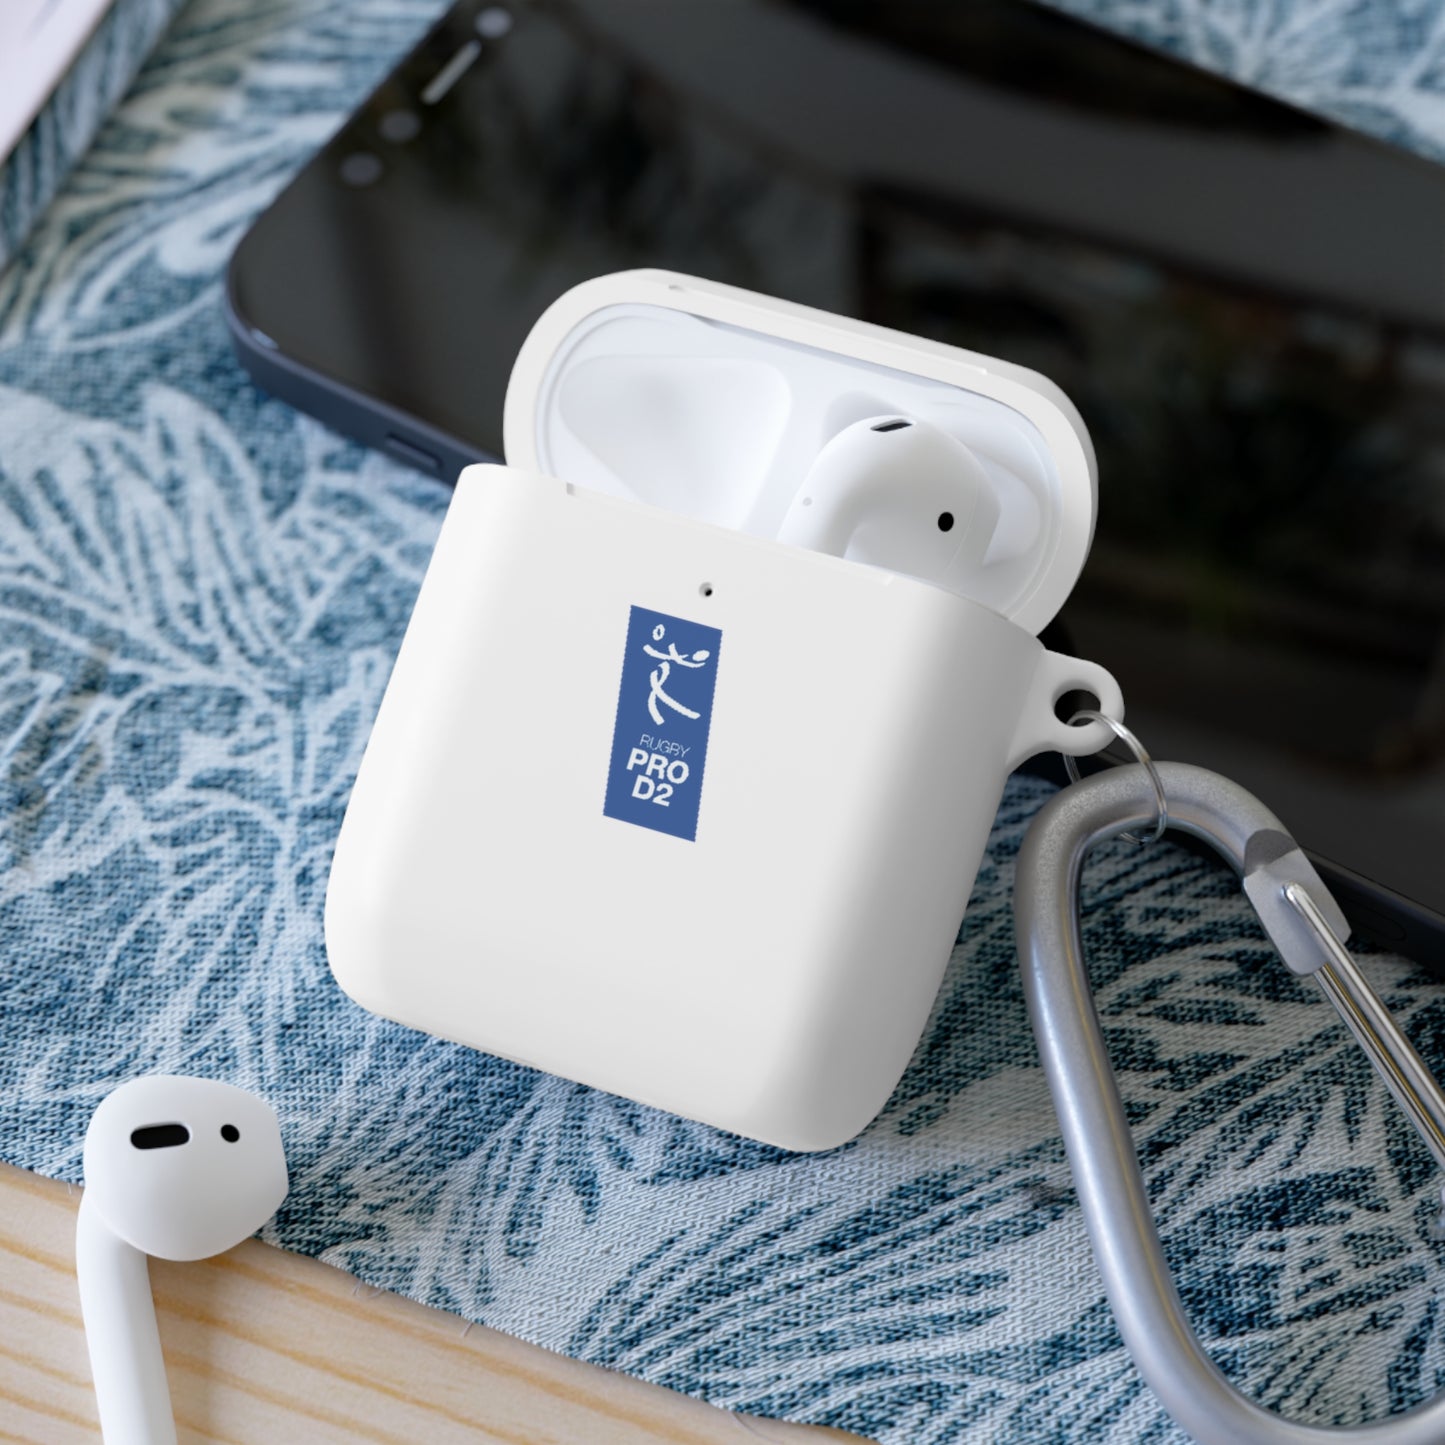 Pro D2 AirPods and AirPods Pro Case Cover